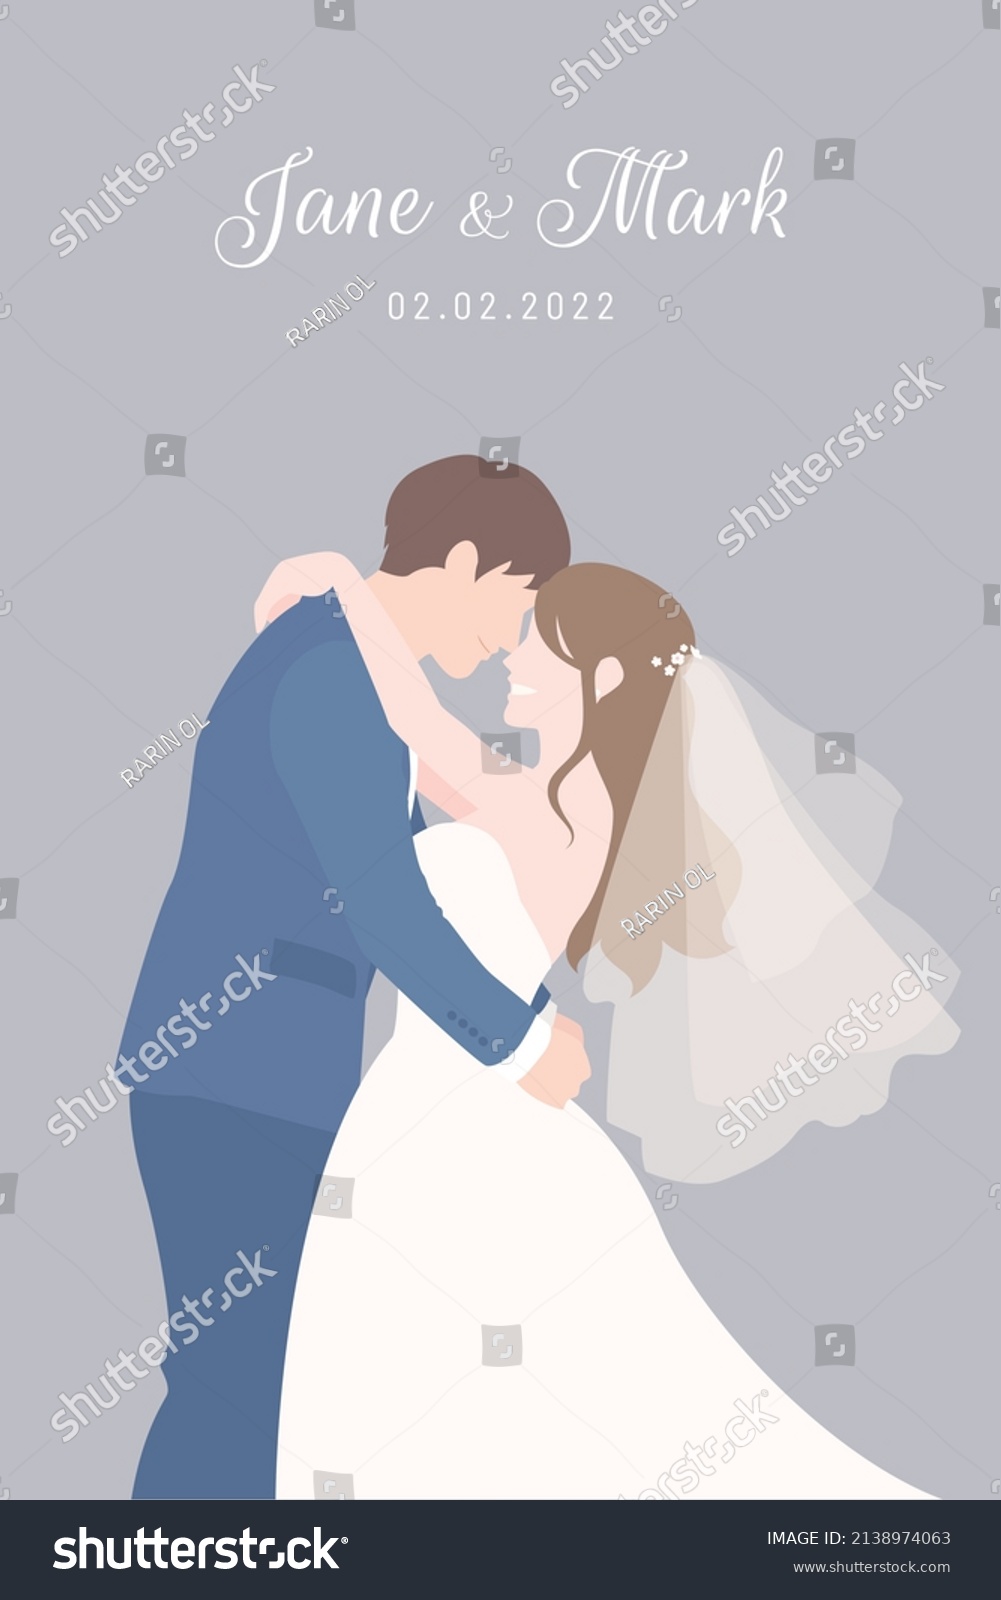 SVG of Bride in white dress and Groom in navy blue suit holding each other for their wedding ceremony invitation card vector couple characters on gray background. svg